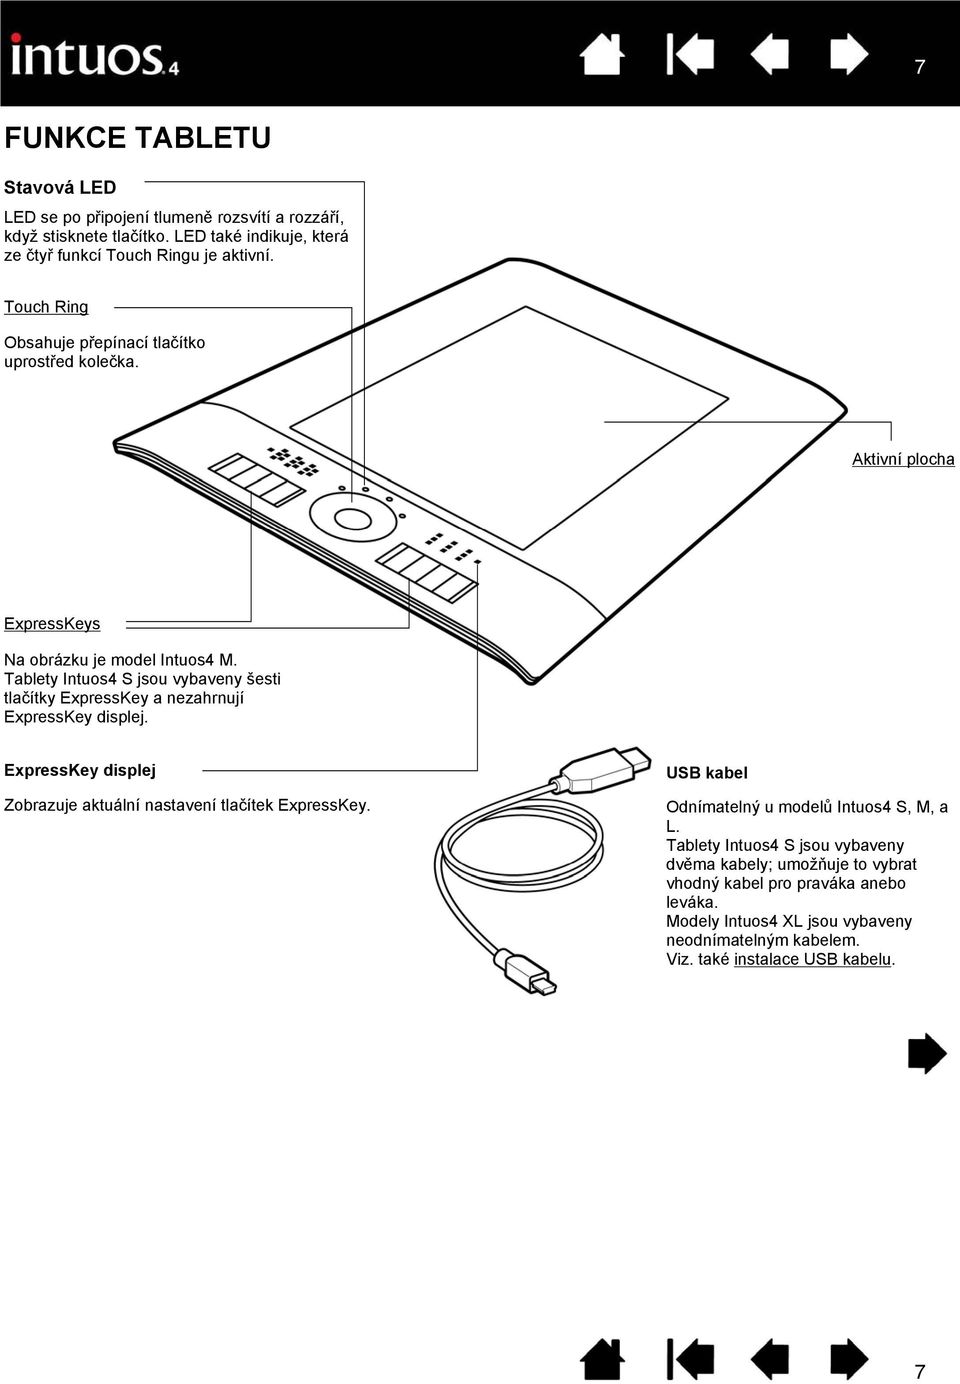 Intuos4 S tablet models are equipped with six ExpressKeys, and do not include the ExpressKeys display. ExpressKeys display Shows the current ExpressKey settings.